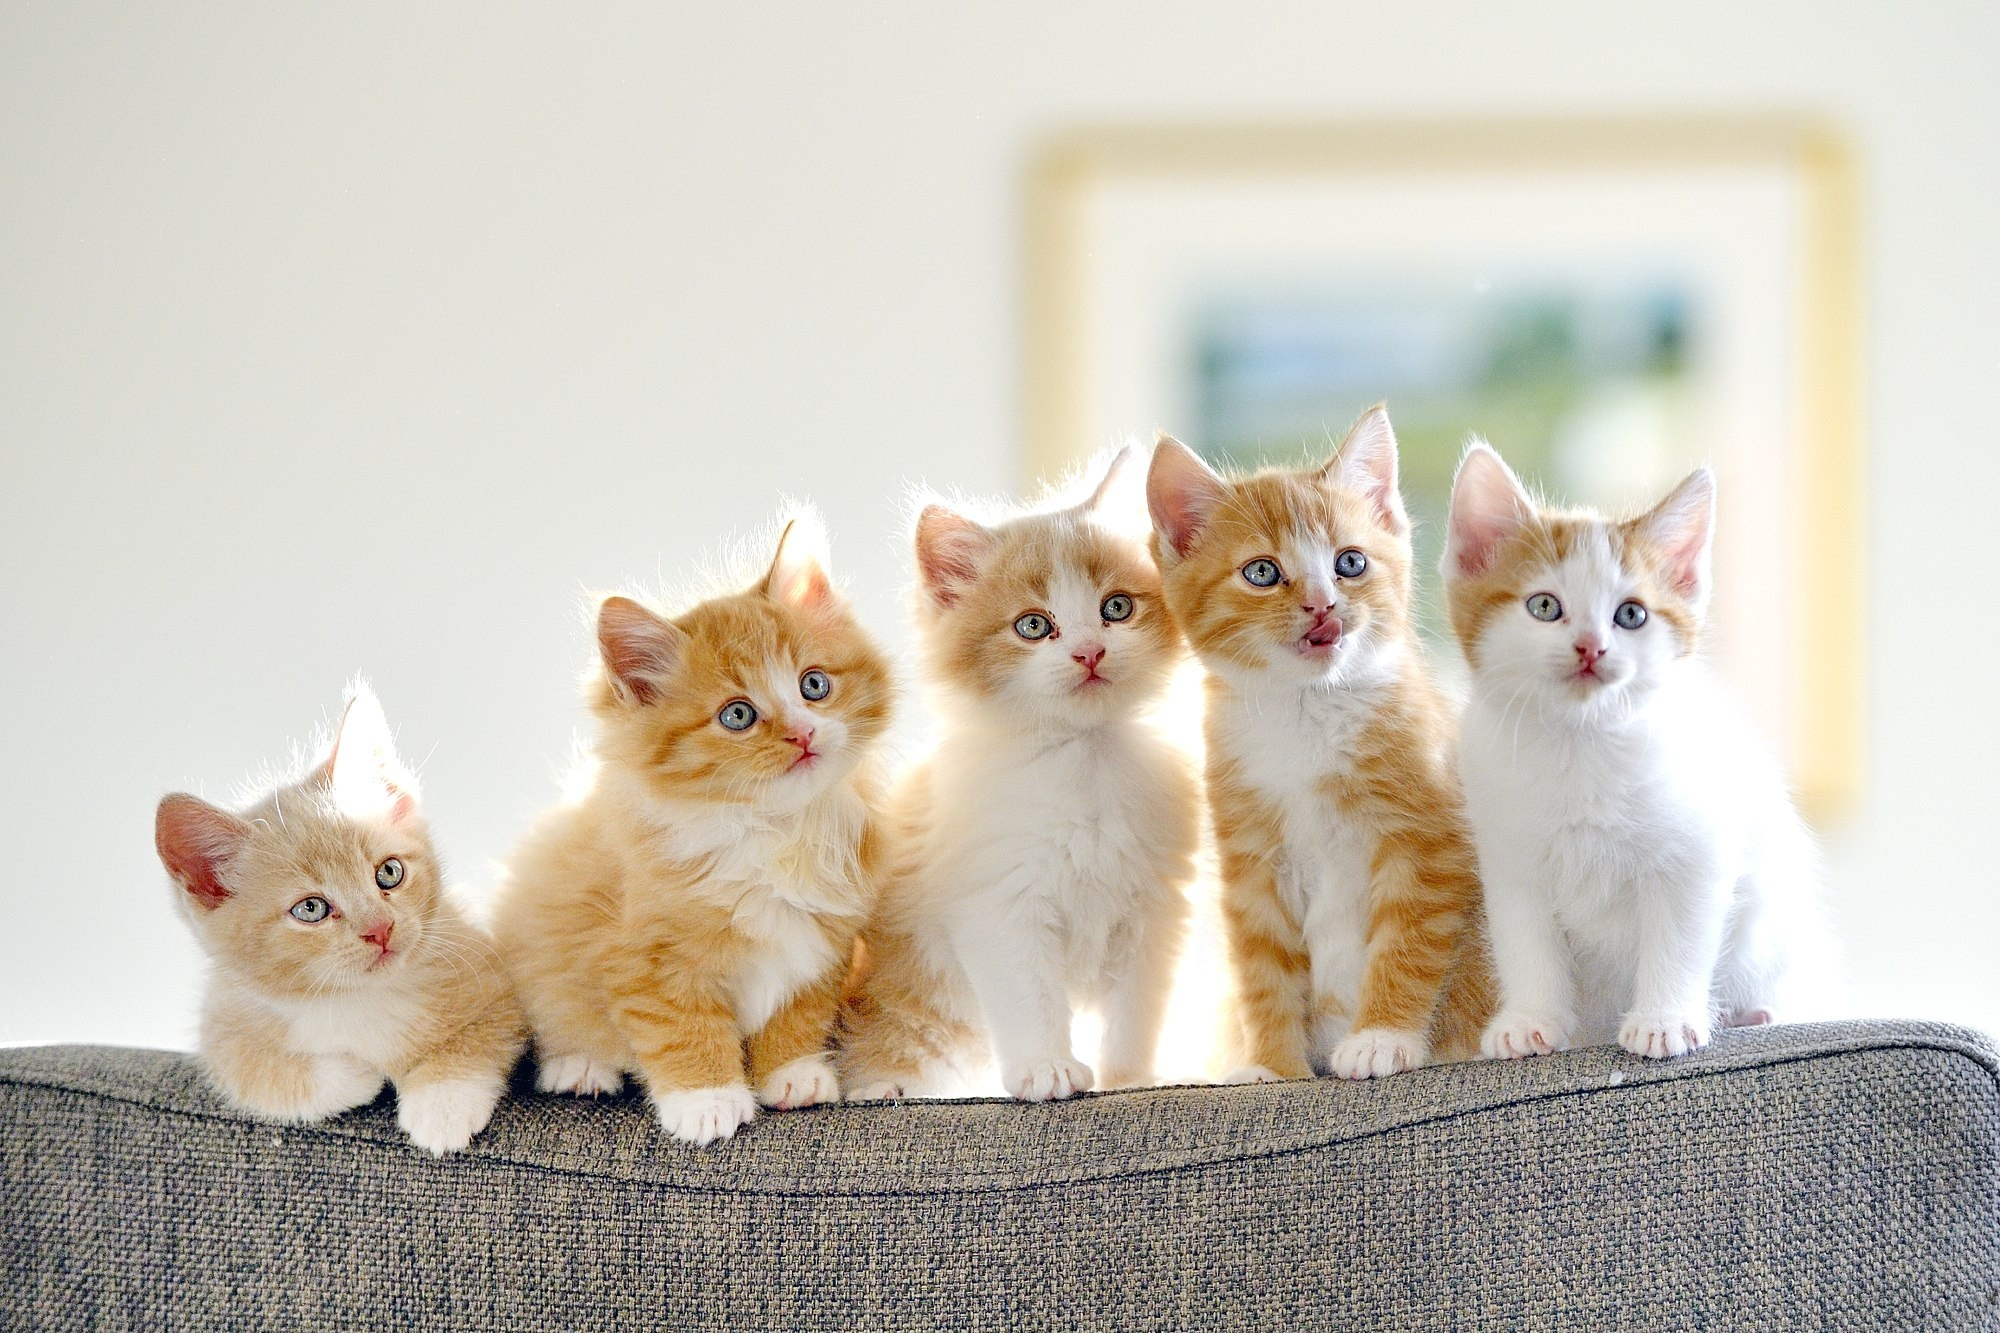 Psychology Explains Why Baby Animal Photos are So Popular on 500px - 500px